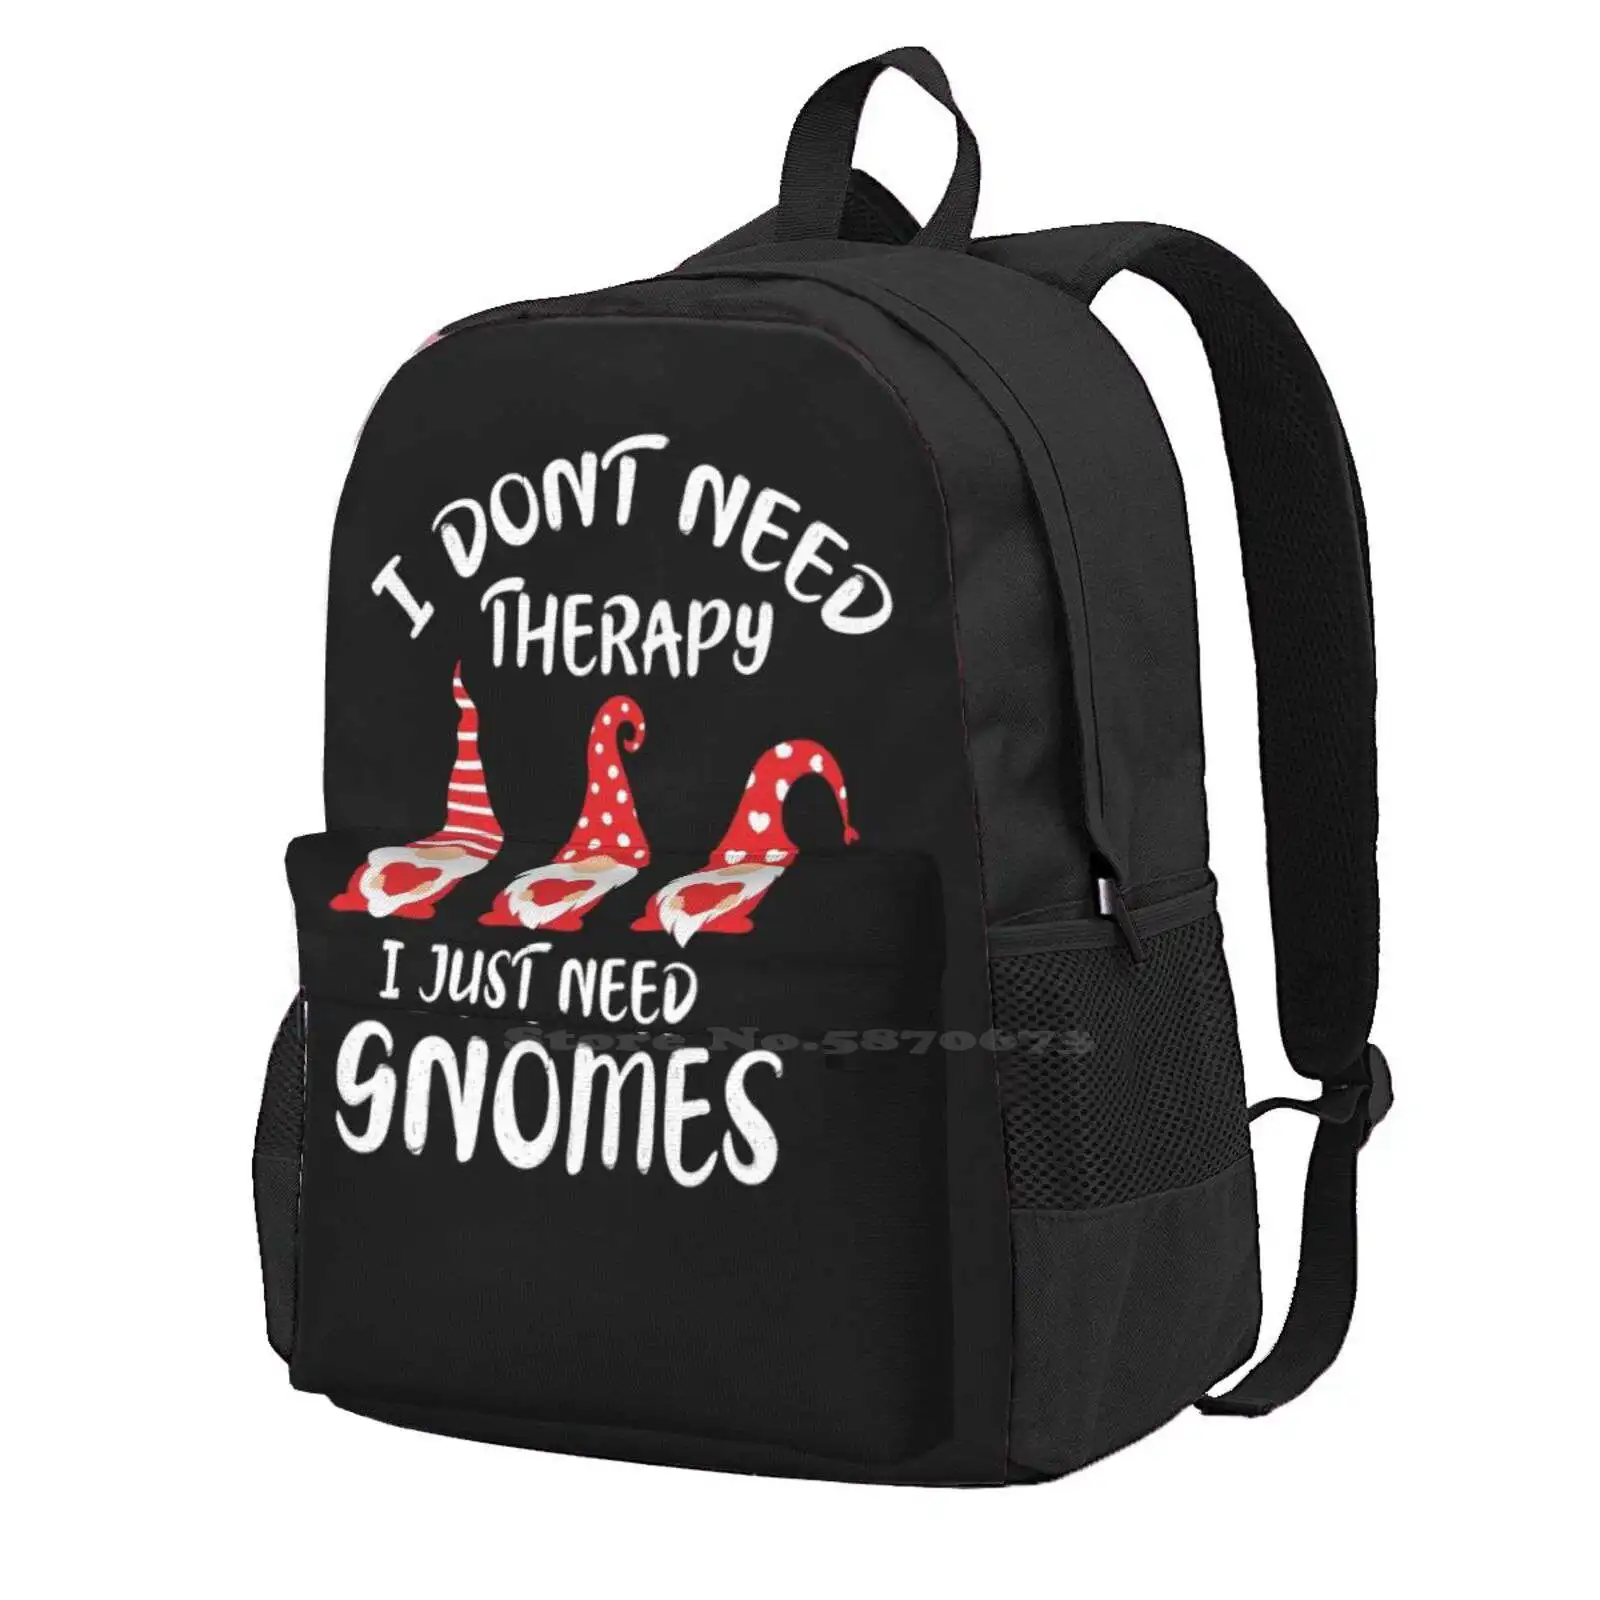 

Funny Cute Gnomes Design Gift , I Dont Need Therapy I Just Need Gnomes Travel Laptop Bagpack School Bags Cute Gnomes Adorable